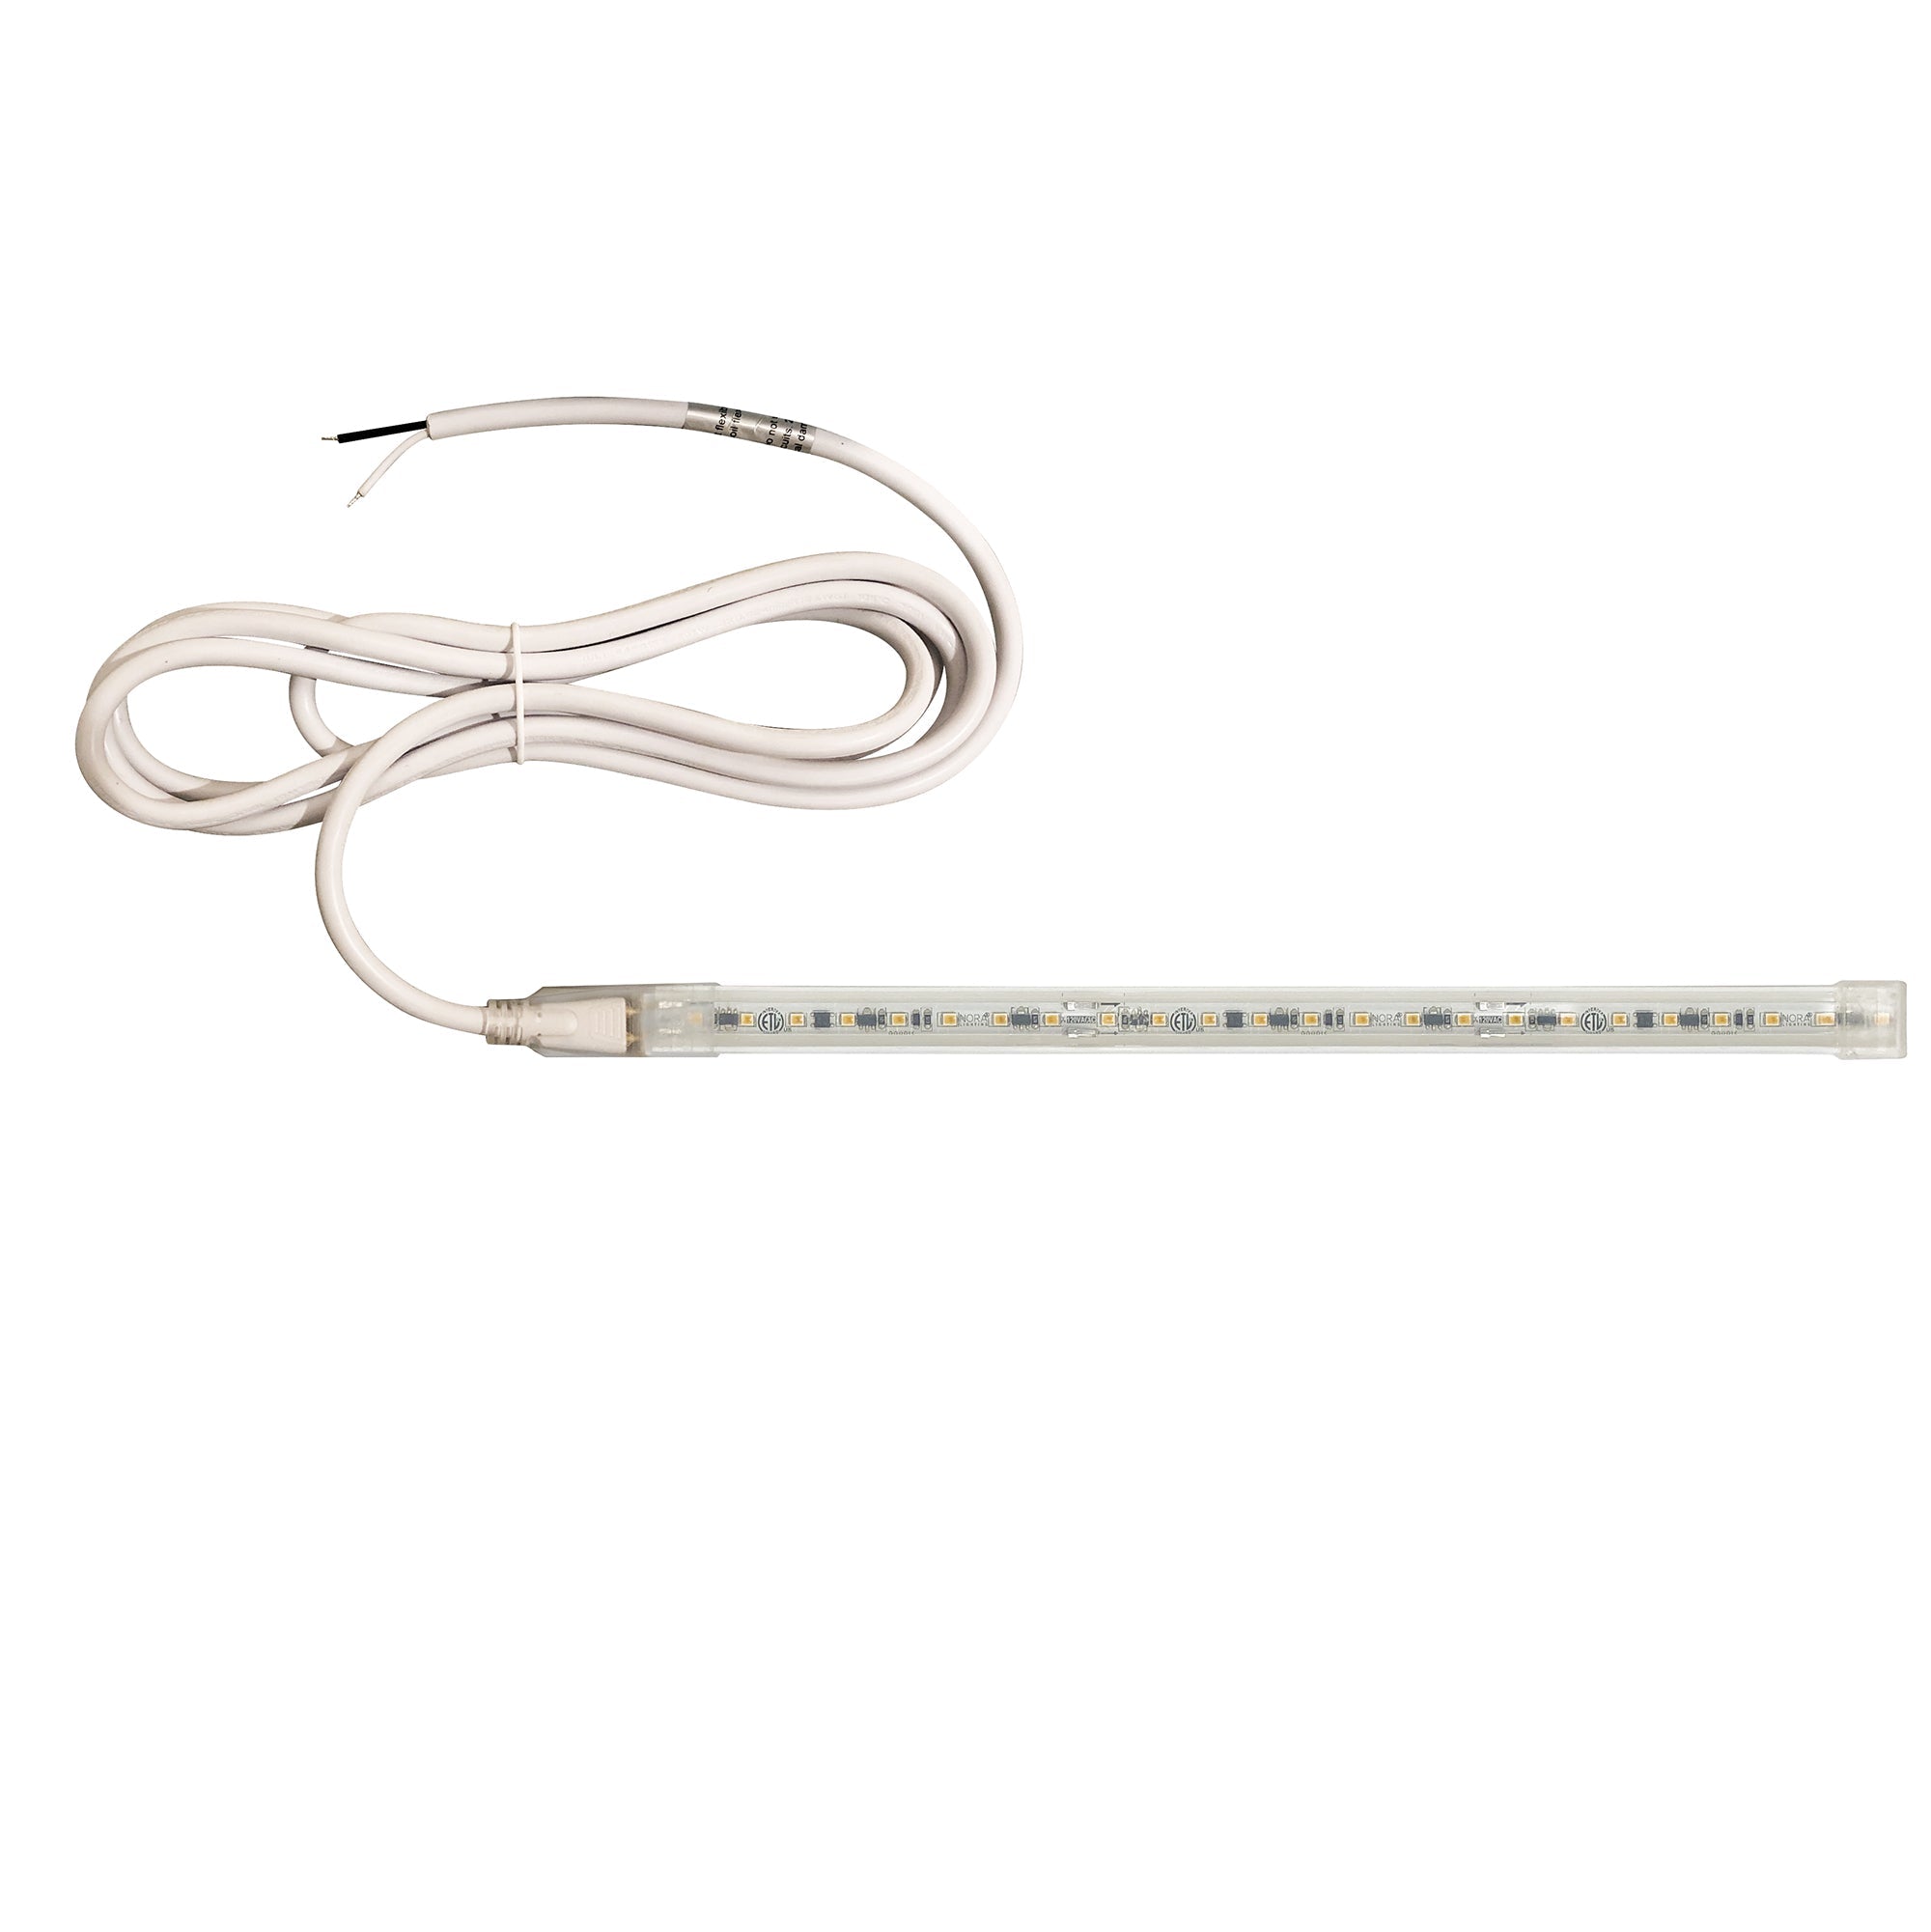 Nora Lighting NUTP13-W5-8-12-930/HW - Accent / Undercabinet - Custom Cut 5-ft, 8-in 120V Continuous LED Tape Light, 330lm / 3.6W per foot, 3000K, w/ Mounting Clips and 8' Hardwired Power Cord